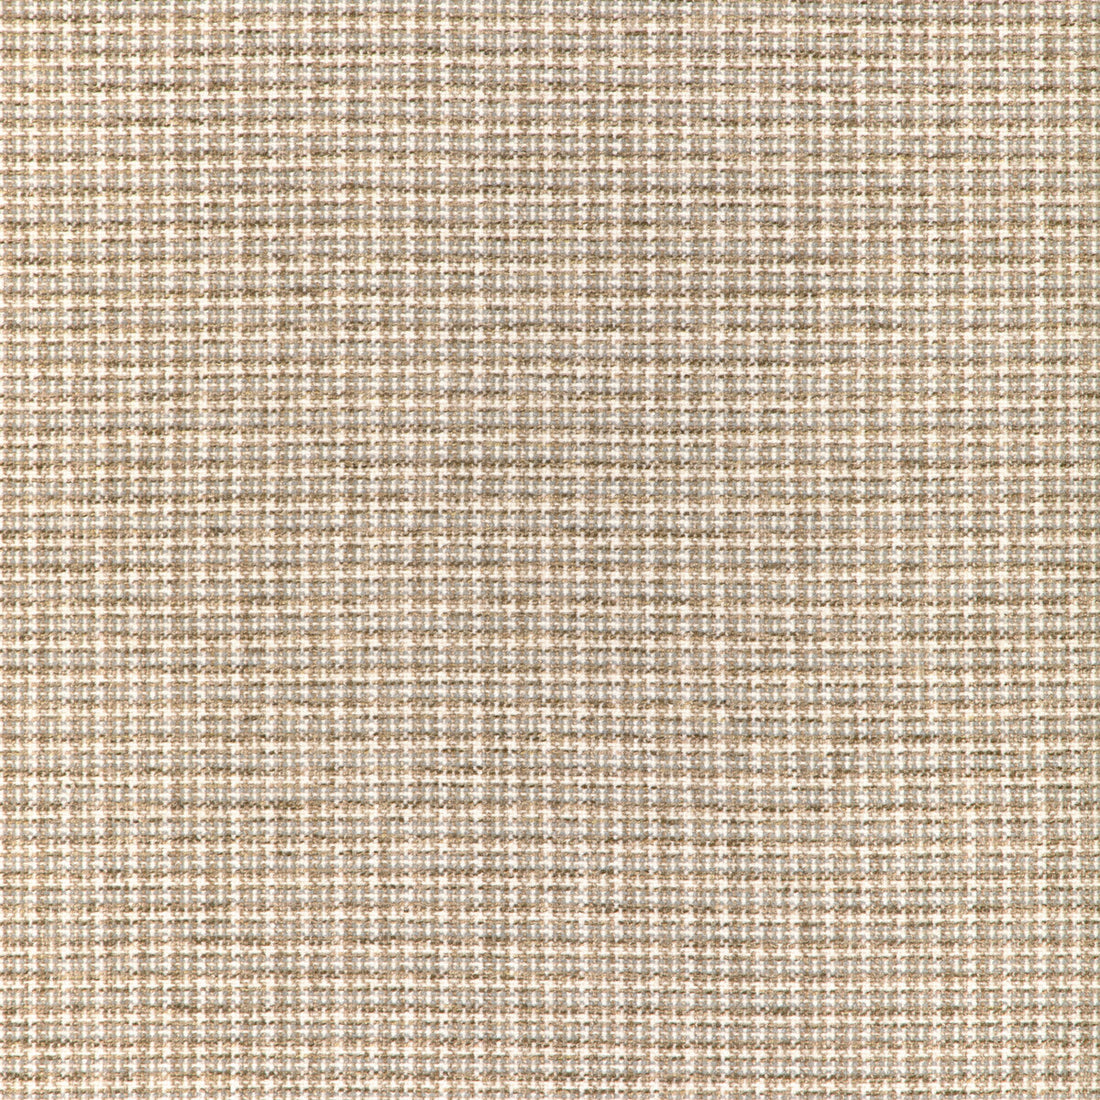 Aria Check fabric in rattan color - pattern 36950.16.0 - by Kravet Basics in the Mid-Century Modern collection